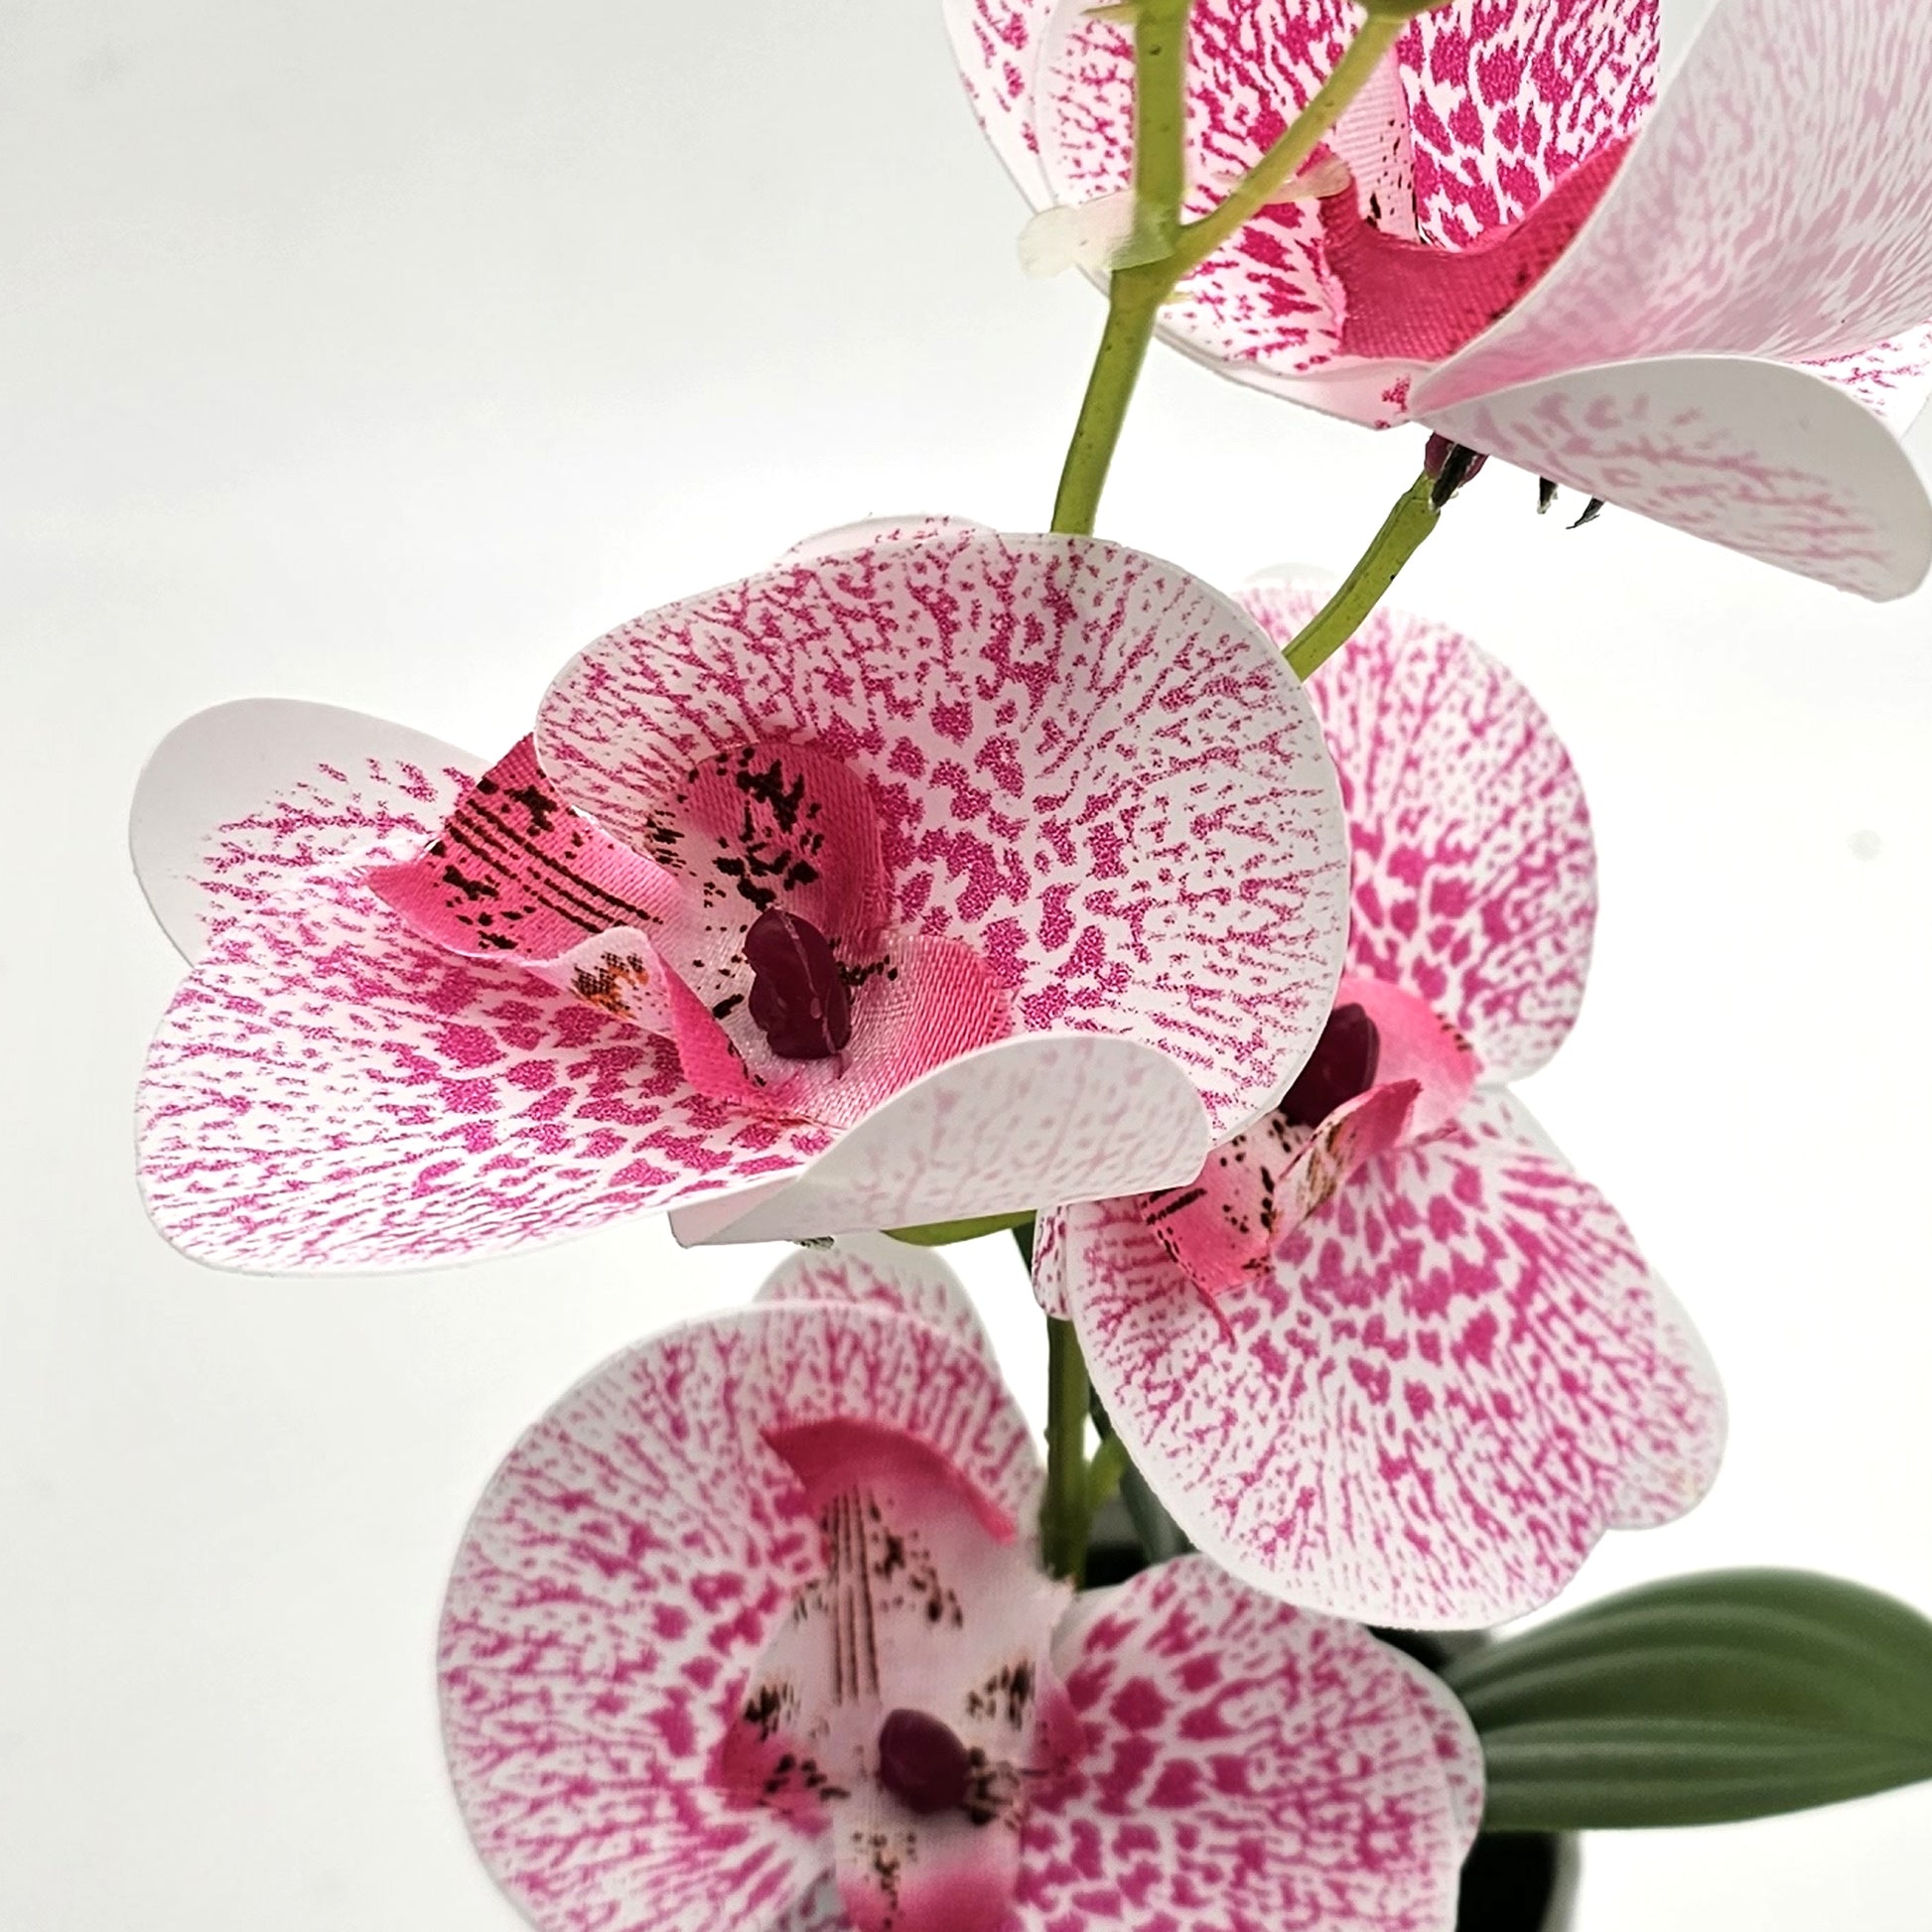  Orchid with Leaf Plant,Dining table decorating